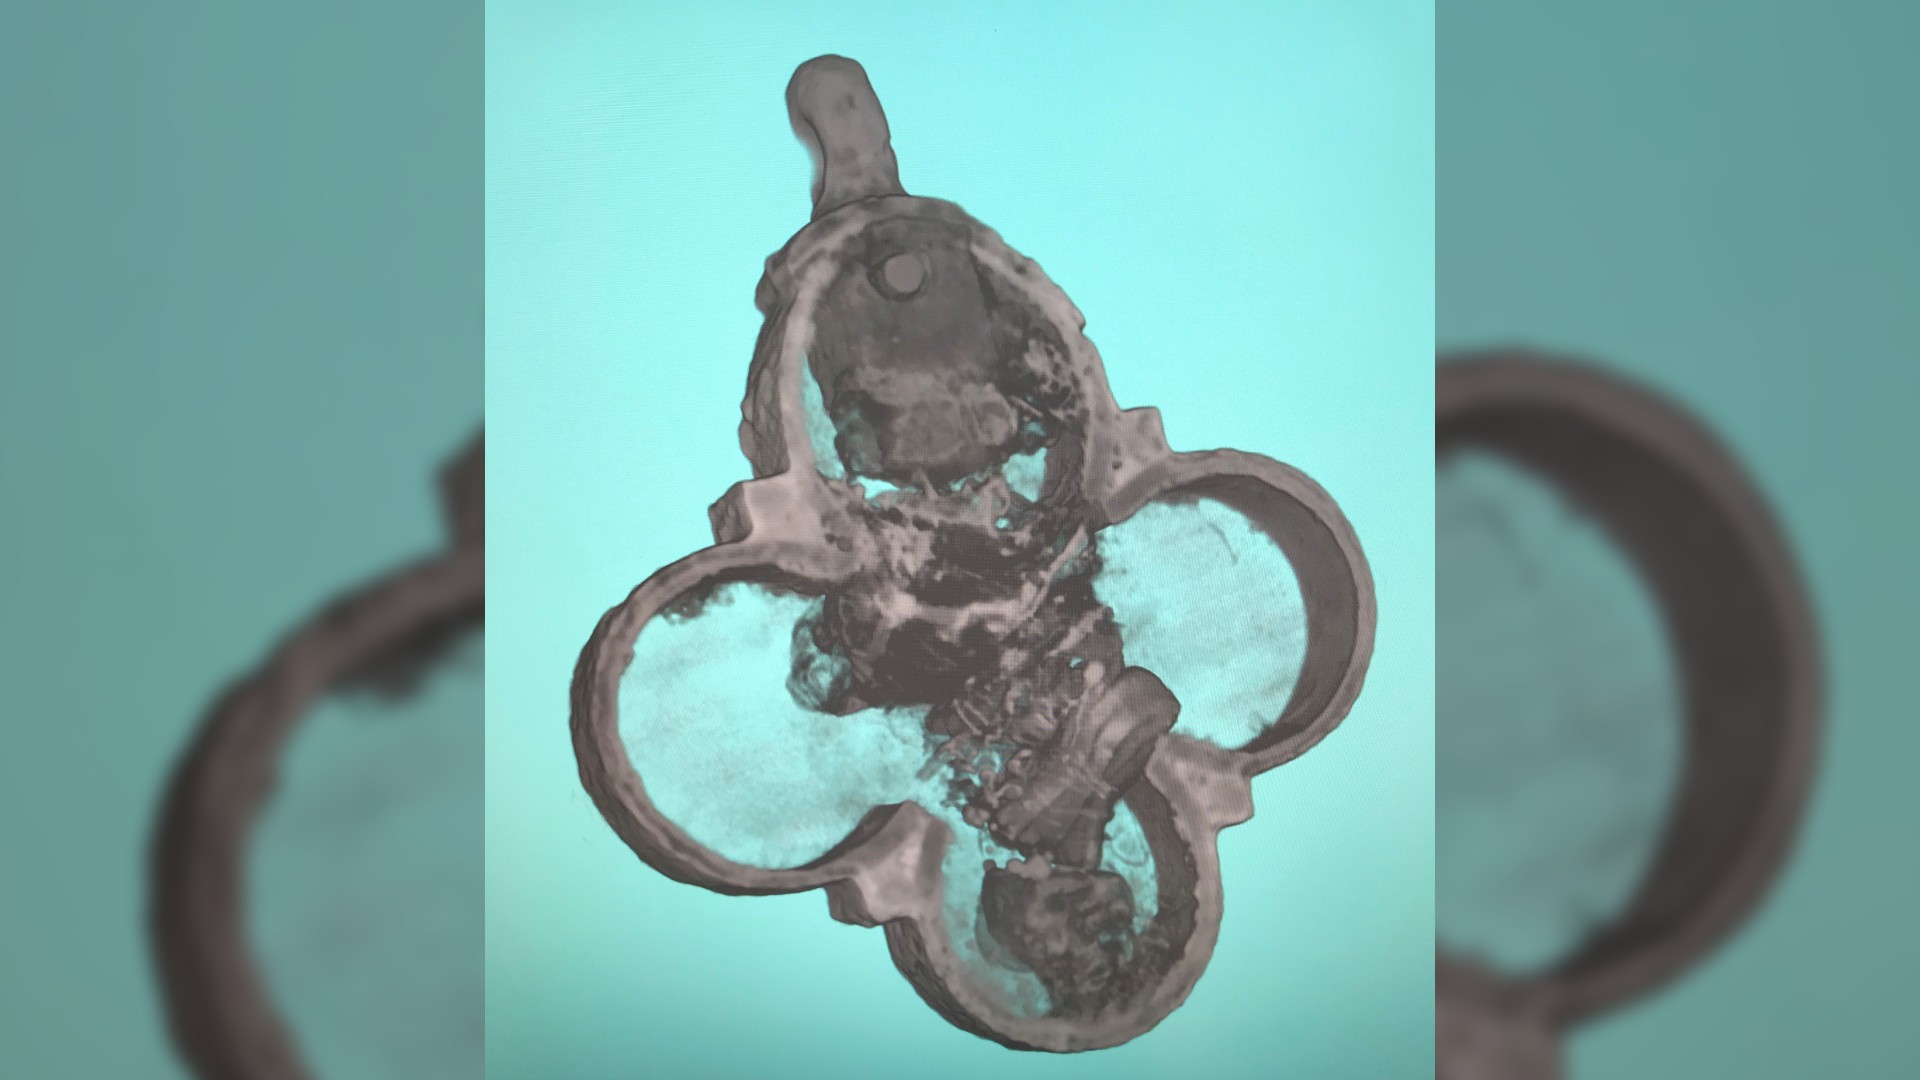 X-rays were absorbed by the metal of the pendant and couldn't show the organic materials inside; intead, neutron tomography was used to reveal it held five small cloth bags containing fragments of bone.